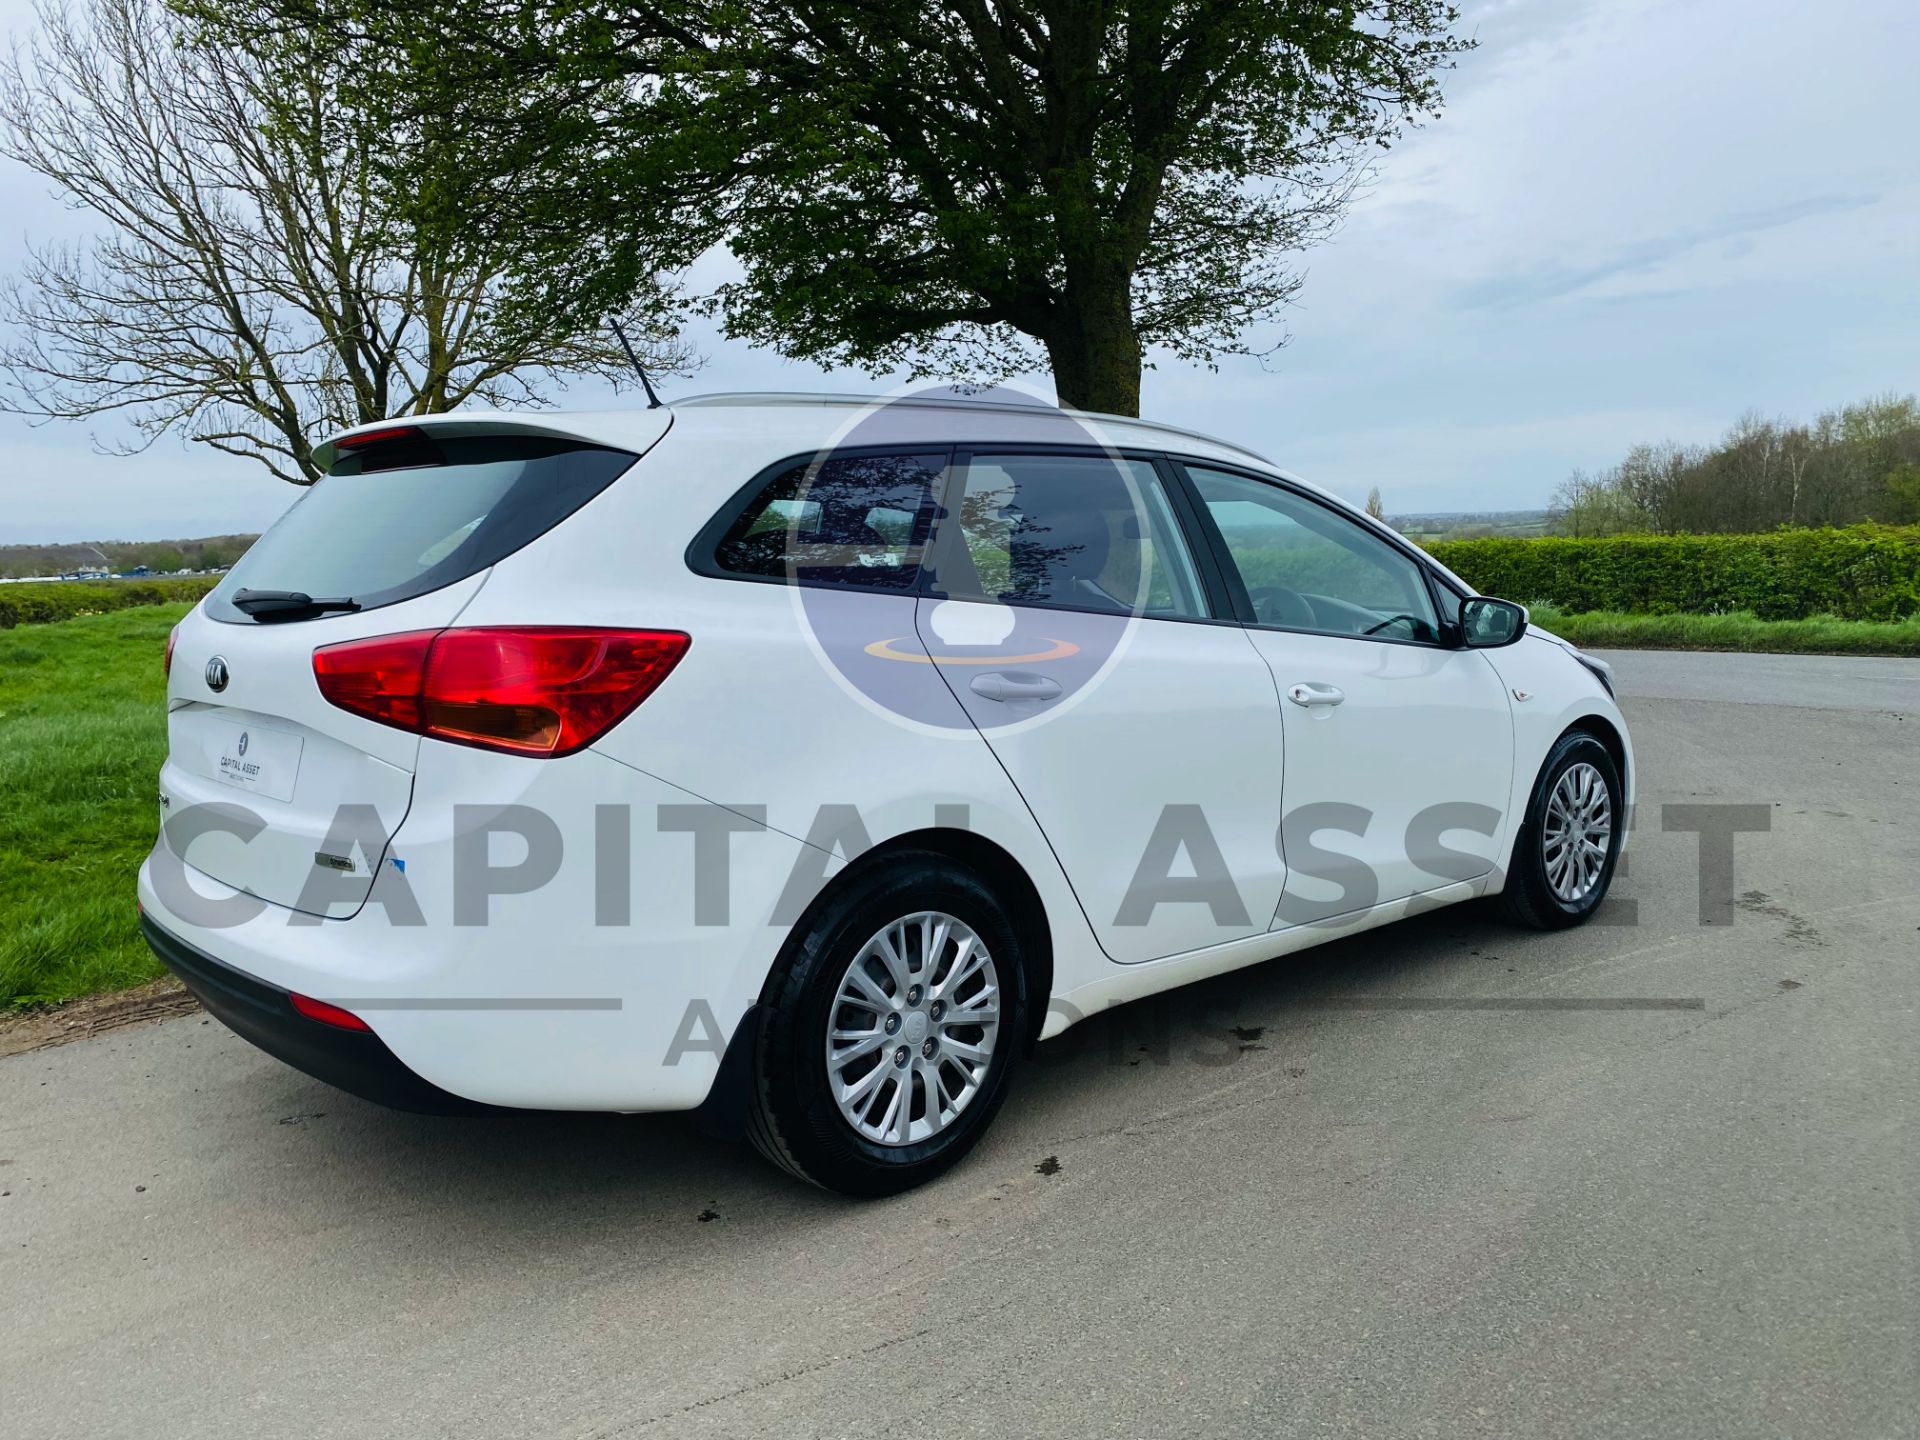 (ON SALE) KIA CEED 1.6 CRDI ISG 1 ESTATE- 18 REG - FULL SERVICE HISTORY - AIR CONDITIONING - Image 9 of 27